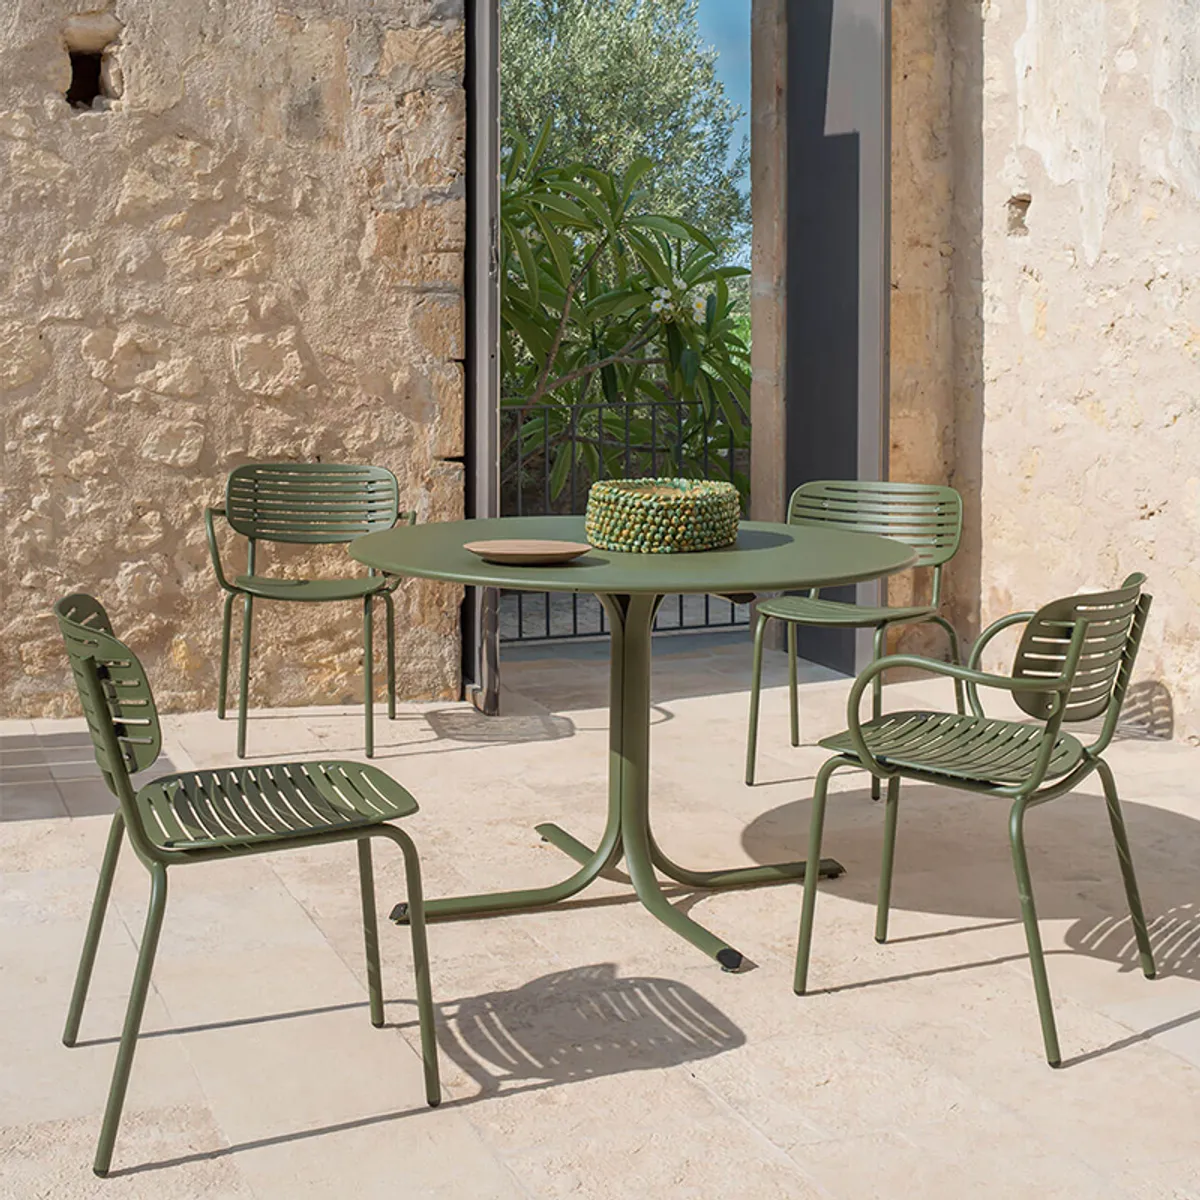 Mom Chairs In Green Metal Outdoor Furniture By Insideoutcontracts